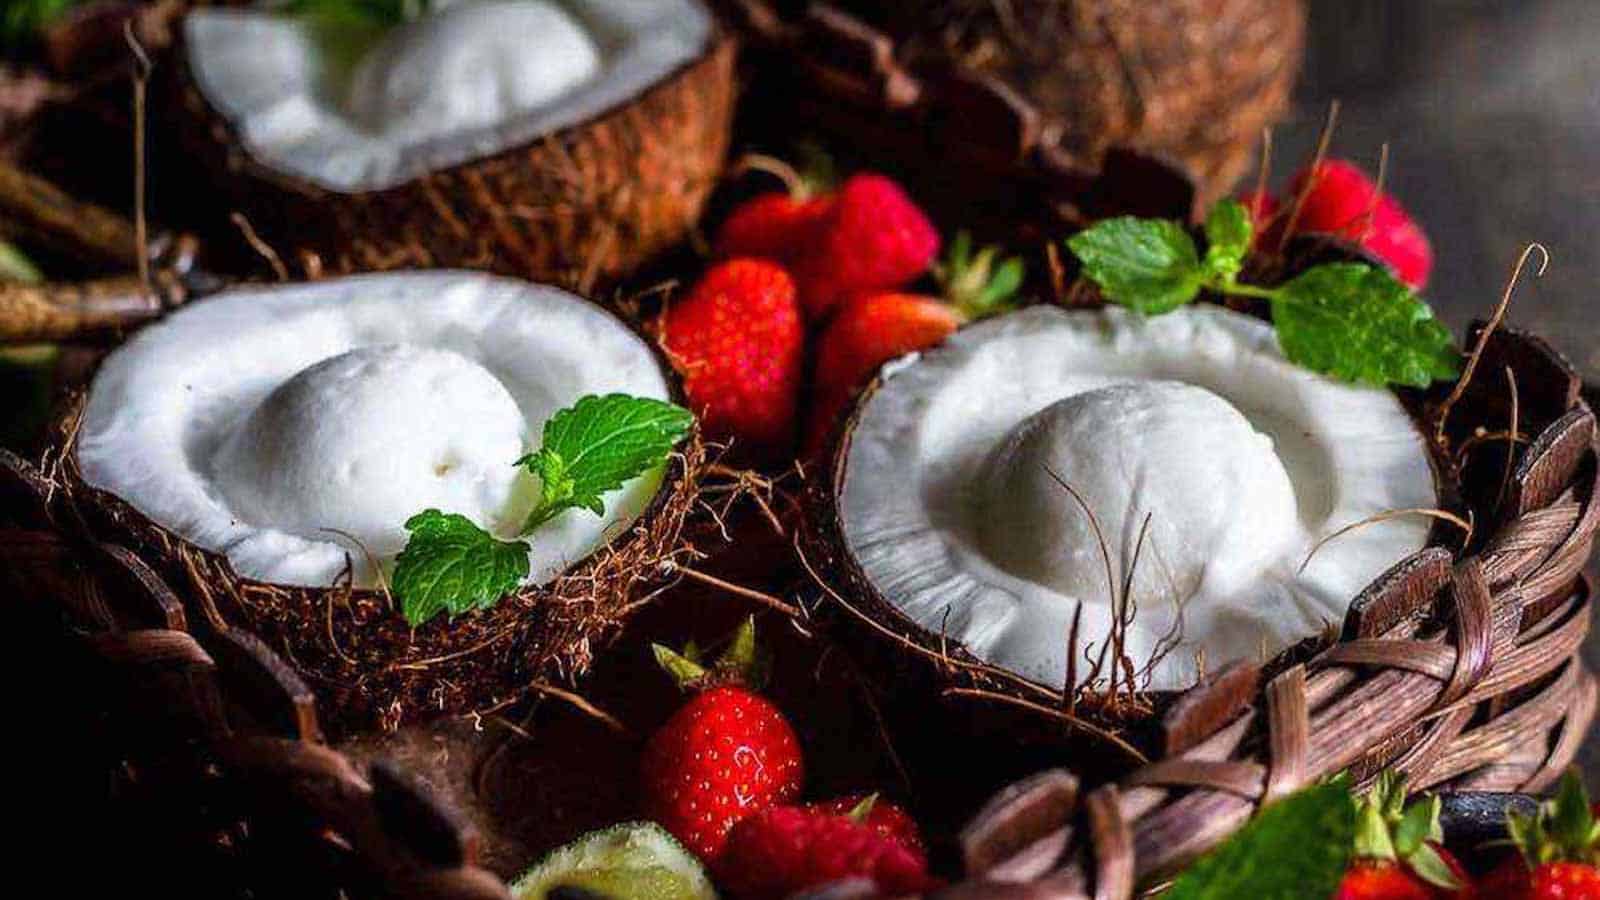 <p>Relish the tropical allure of coconut without the excess carbs in low-carb coconut ice cream. Whether you’re seeking a cooling treat on a hot day or a comforting dessert option, this creamy delight provides a guilt-free way to enjoy the essence of a tropical paradise while staying mindful of your carb intake.<br><strong>Get the Recipe: </strong><a href="https://www.lowcarb-nocarb.com/keto-coconut-ice-cream/?utm_source=msn&utm_medium=page&utm_campaign=Your%20title%20here:%20it%20should%20be%2055-60%20characters,%20ideally">Low Carb Coconut Ice Cream</a></p>